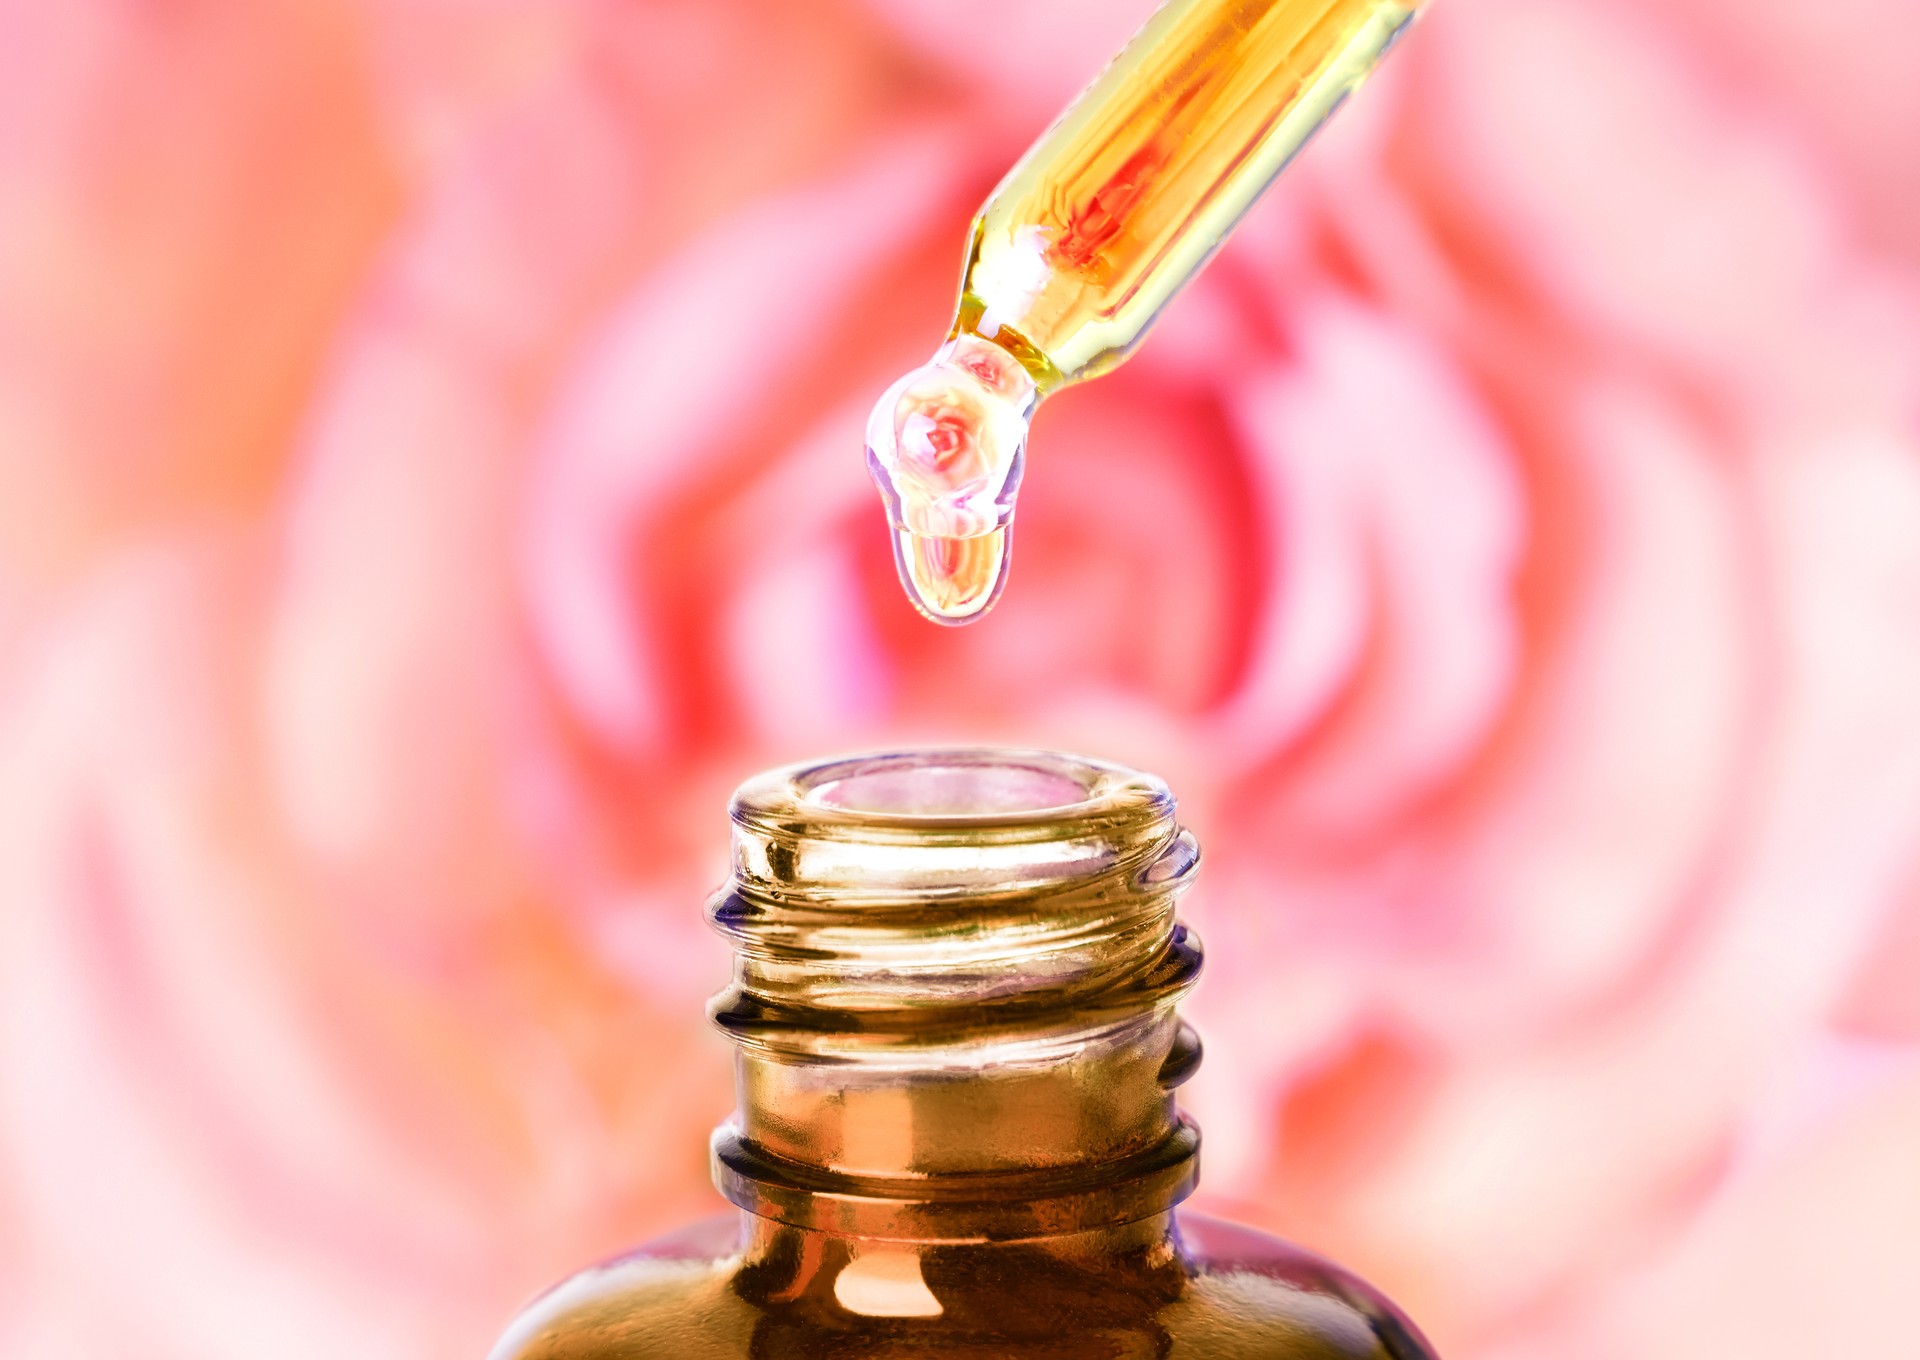 Essential rose oil water dropping from pipette to bottle. Aromatherapy.